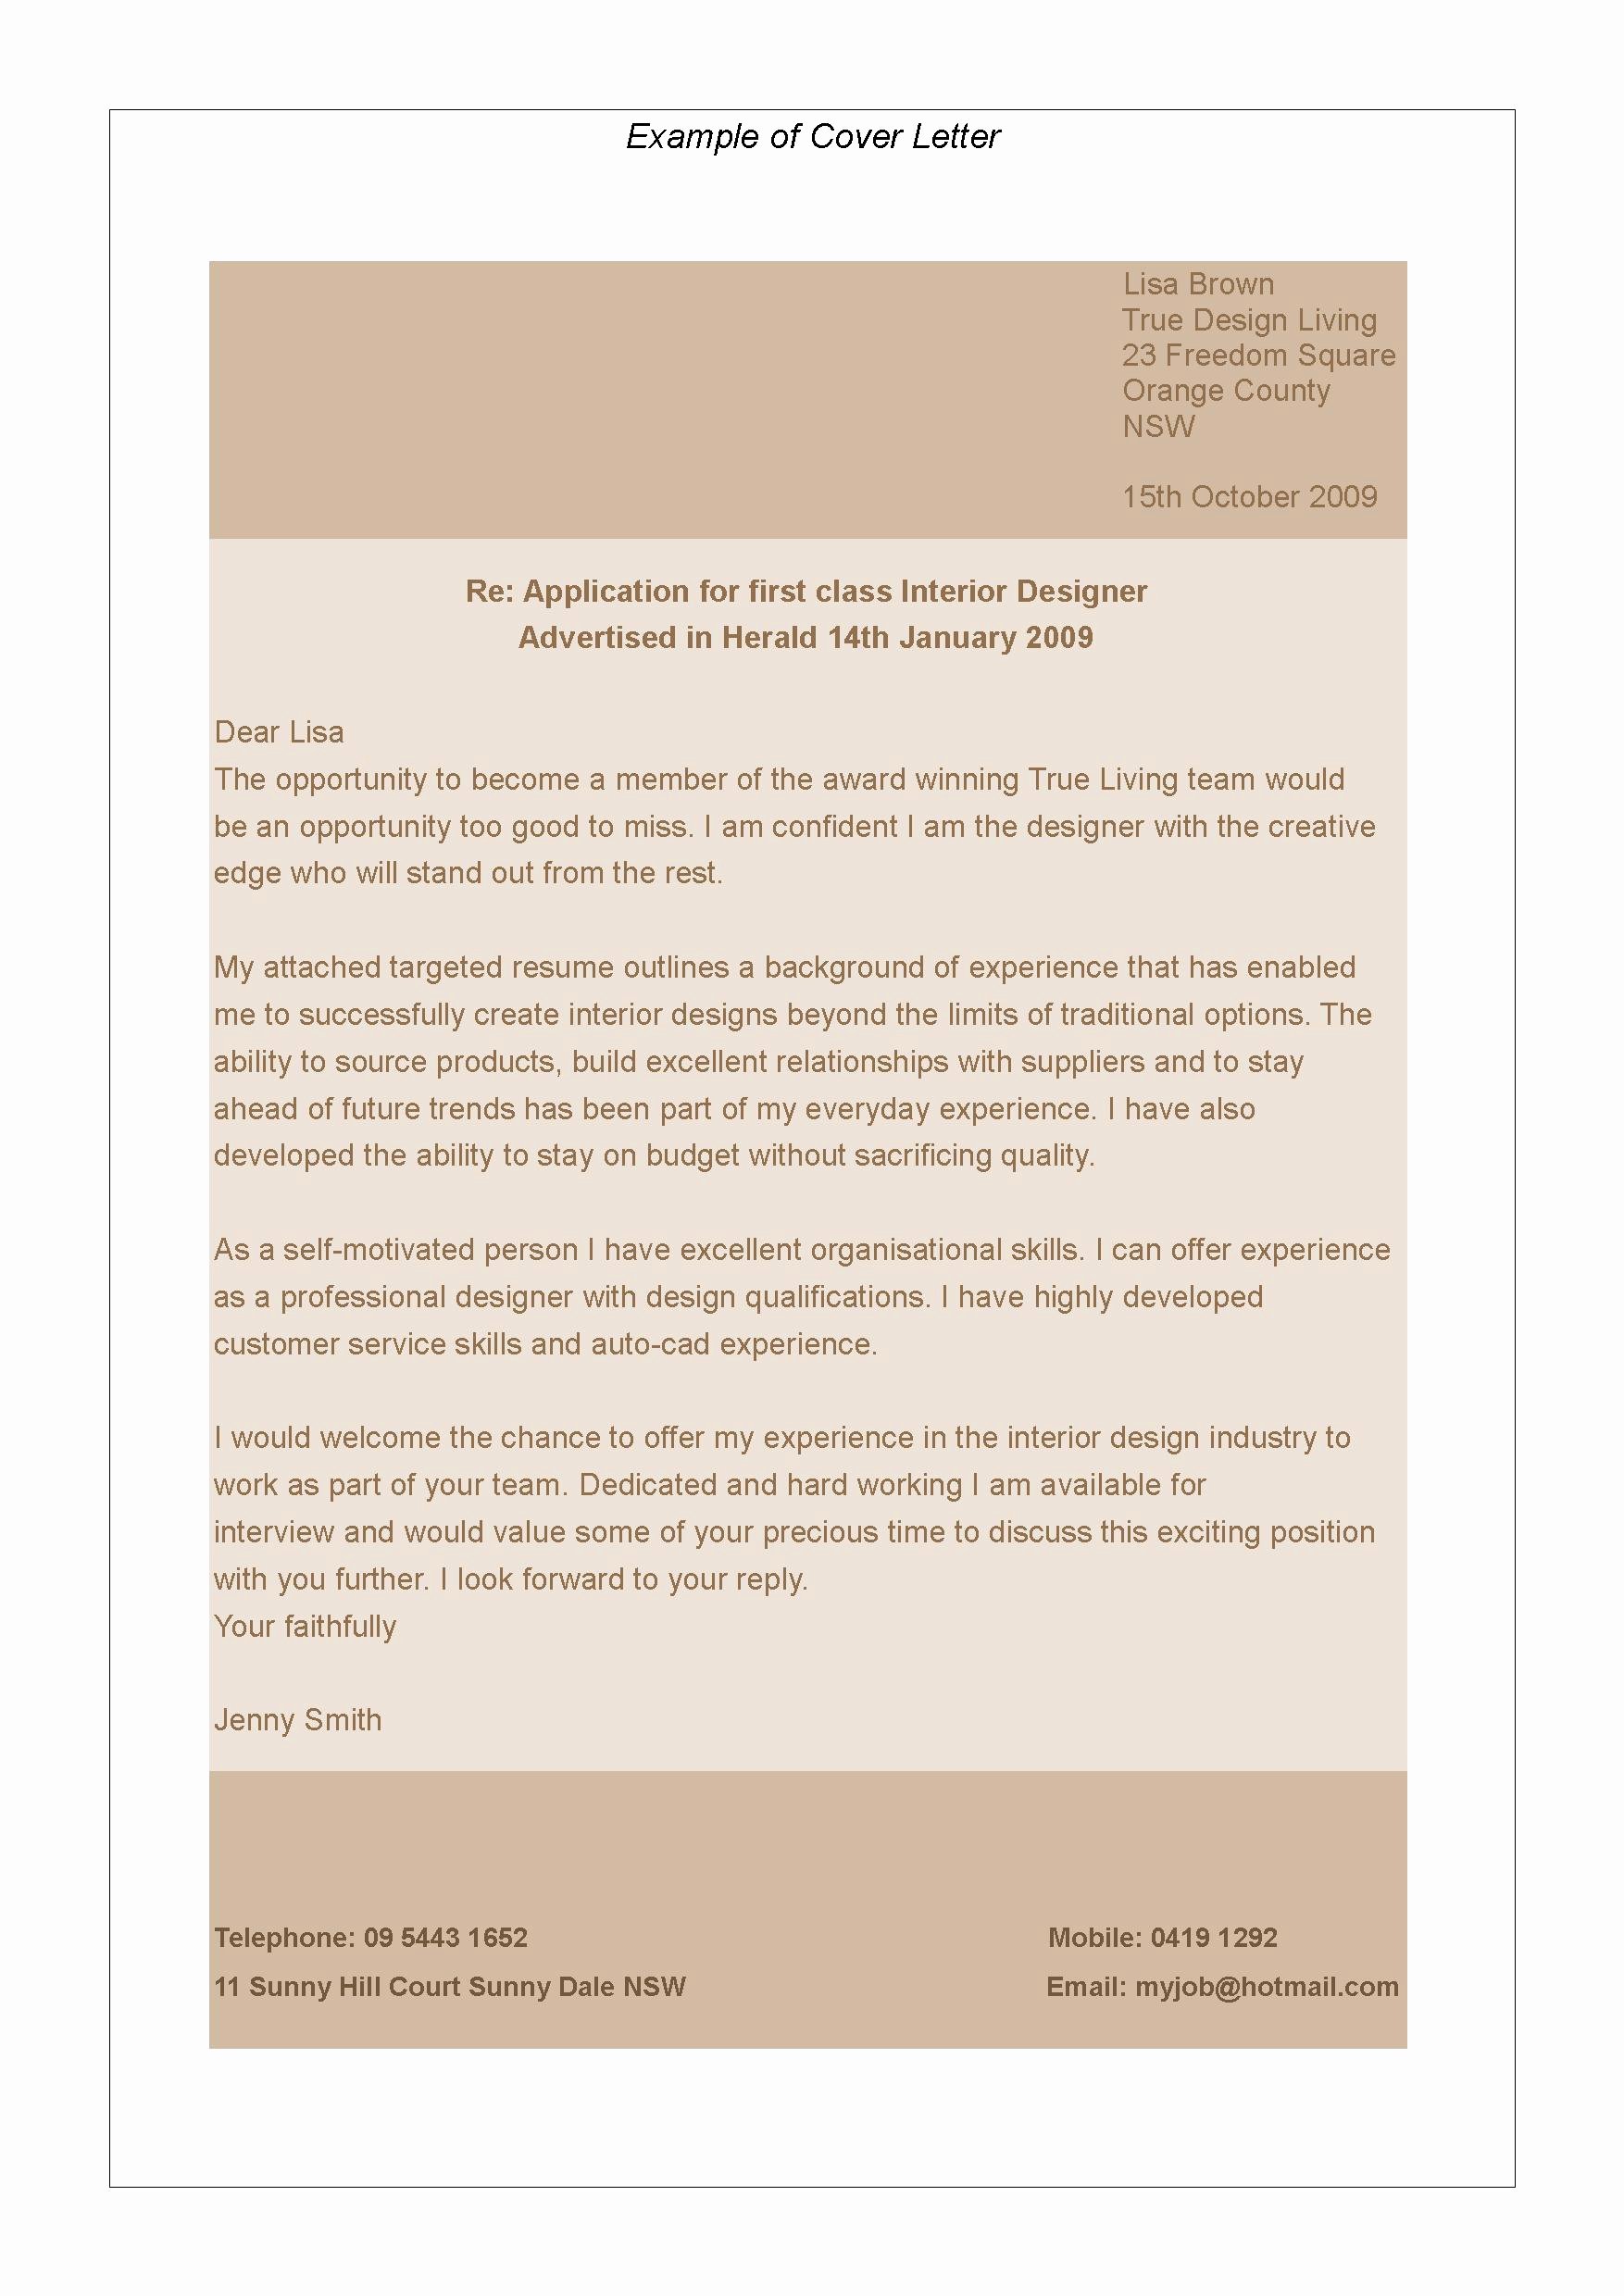 Application for A Job Letter Awesome Designers some Tips On How to Make You Job Application